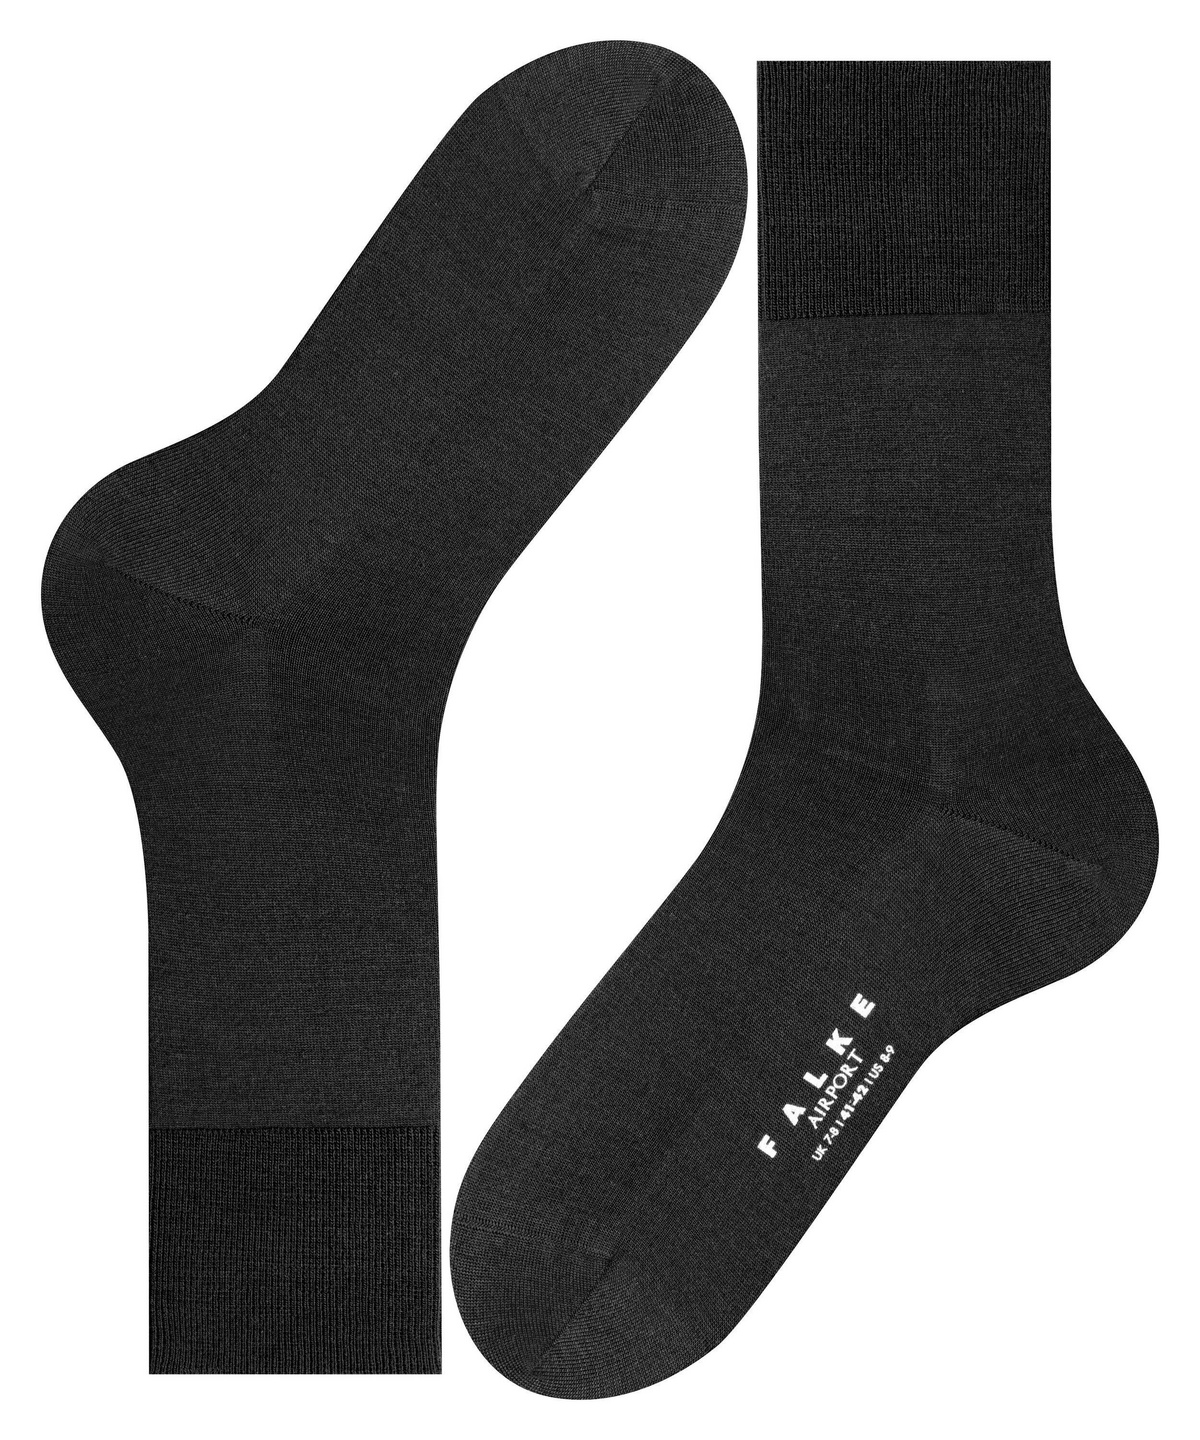 FALKE Men's Airport Dress Socks Over the Calf Black More Colors 1 Pair Merino Wool Cotton Blend for Business and Casual 